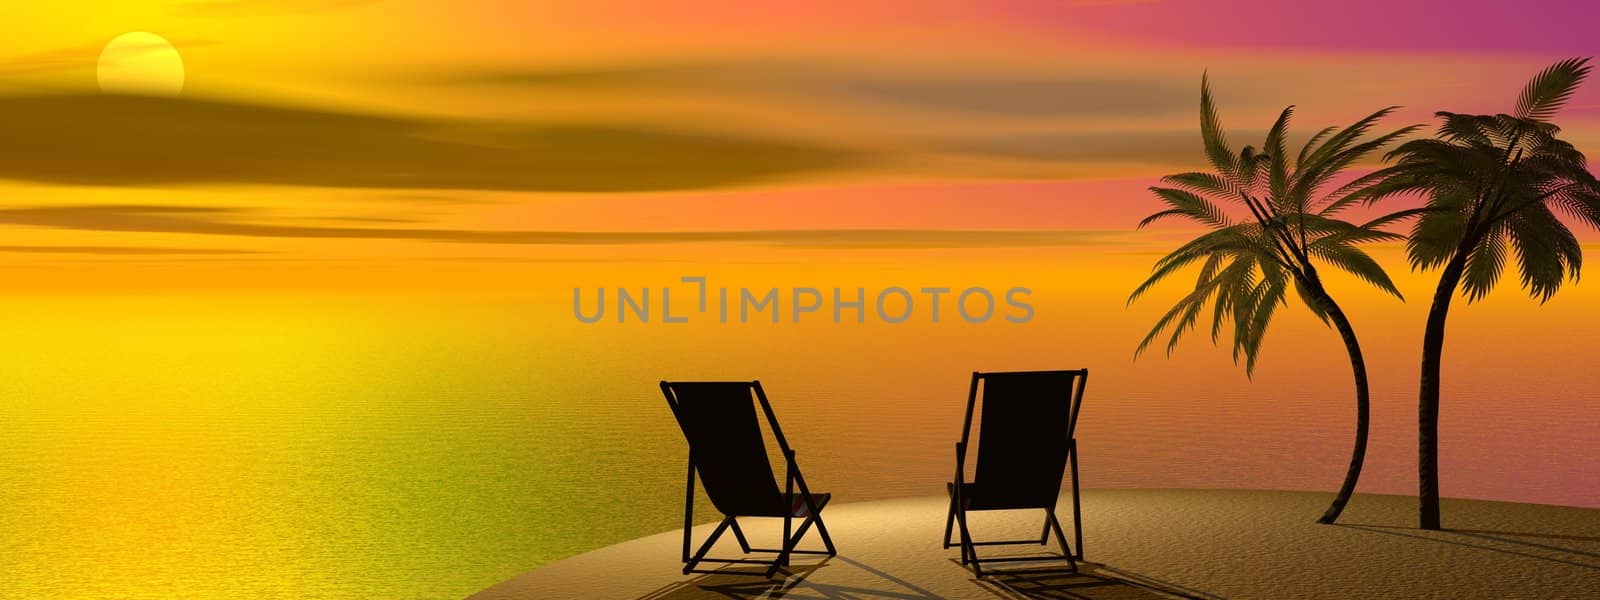 Two chairs and palm trees on the sand next to the sea by sunset